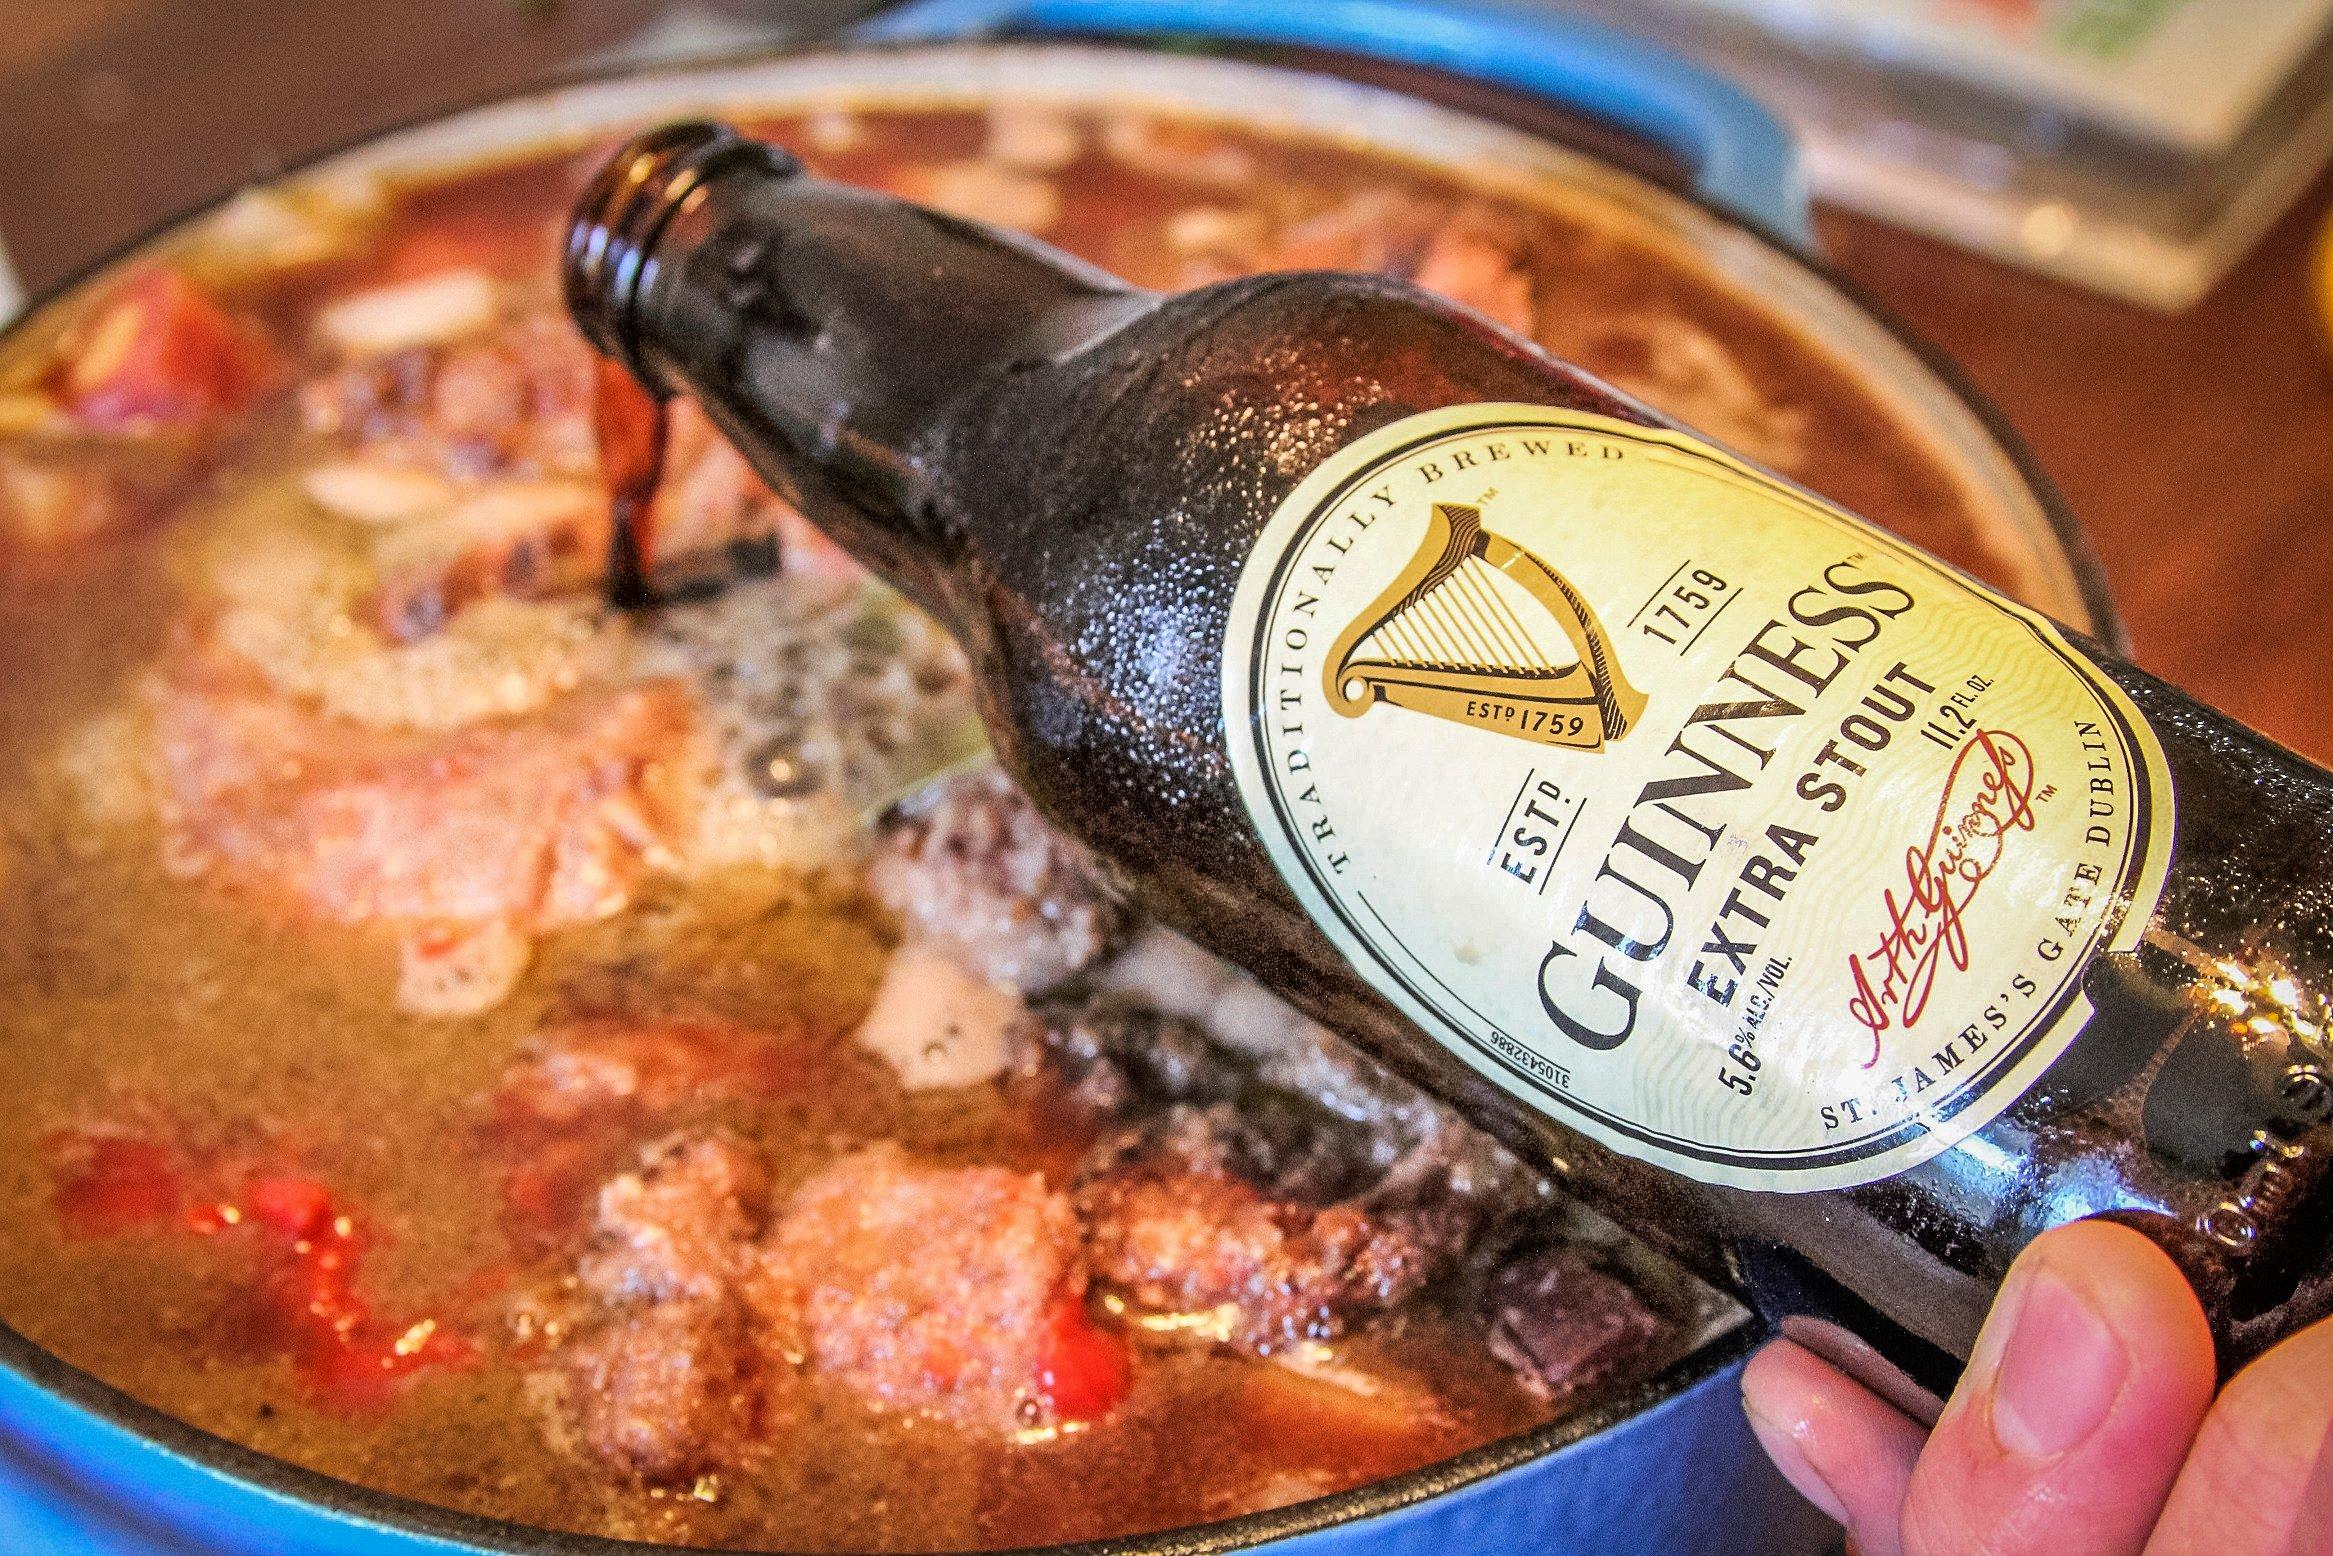 Add the Guinness Beer for a deep malty flavor.